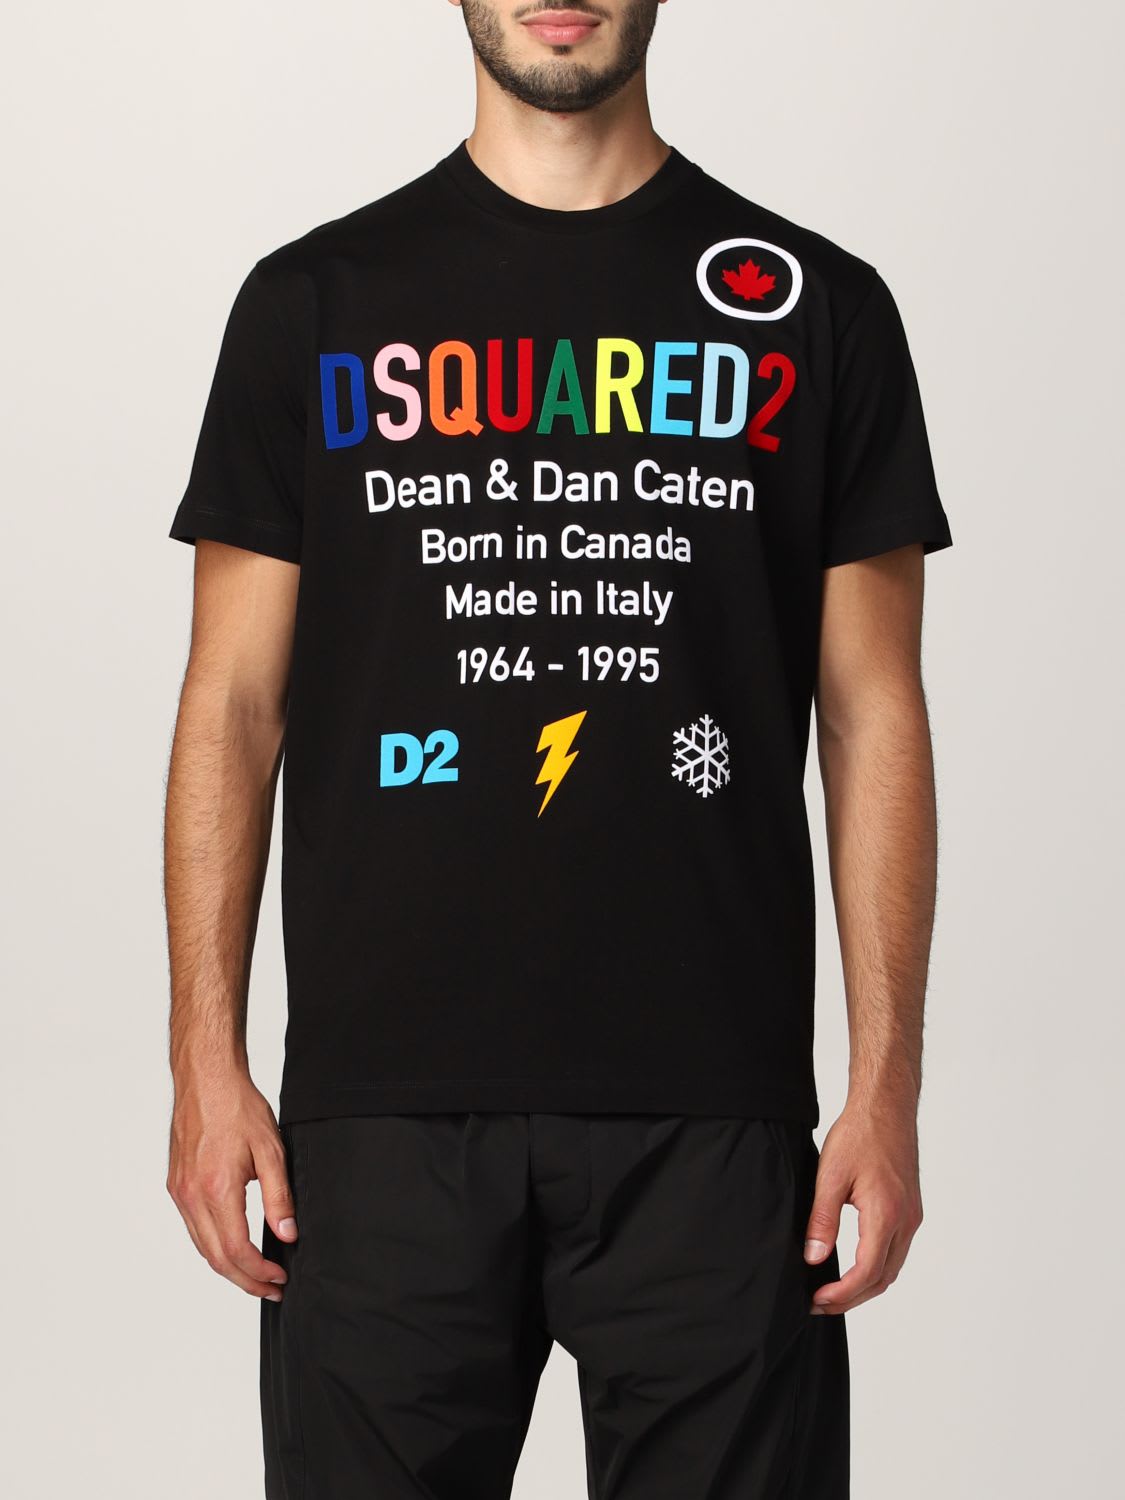 Dsquared2 T-shirt Born In Canada Dsquared2 Cotton T-shirt